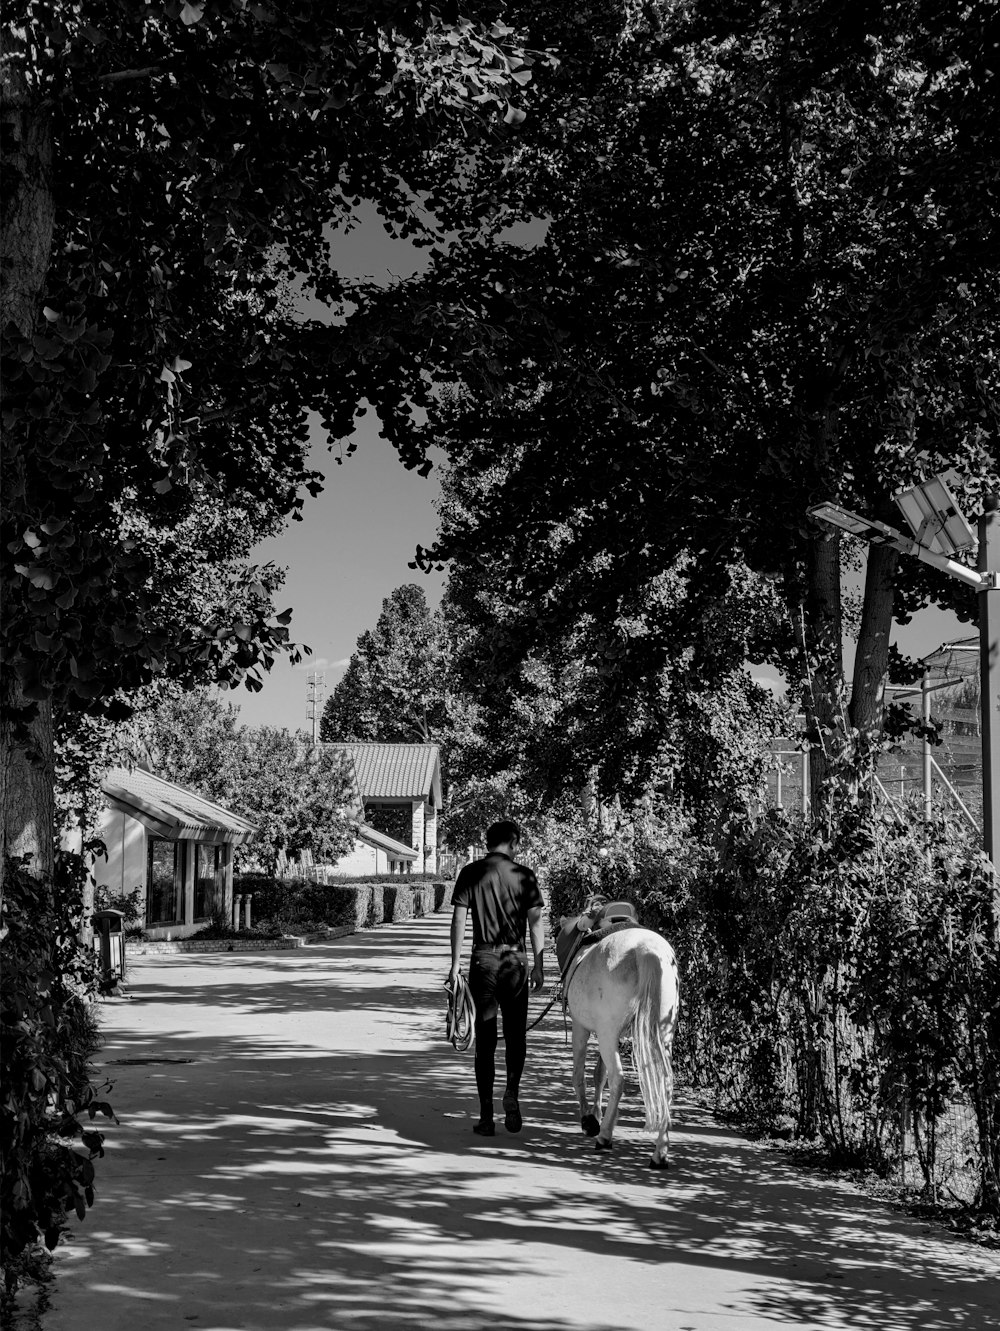 a black and white photo of a man walking a horse down a street